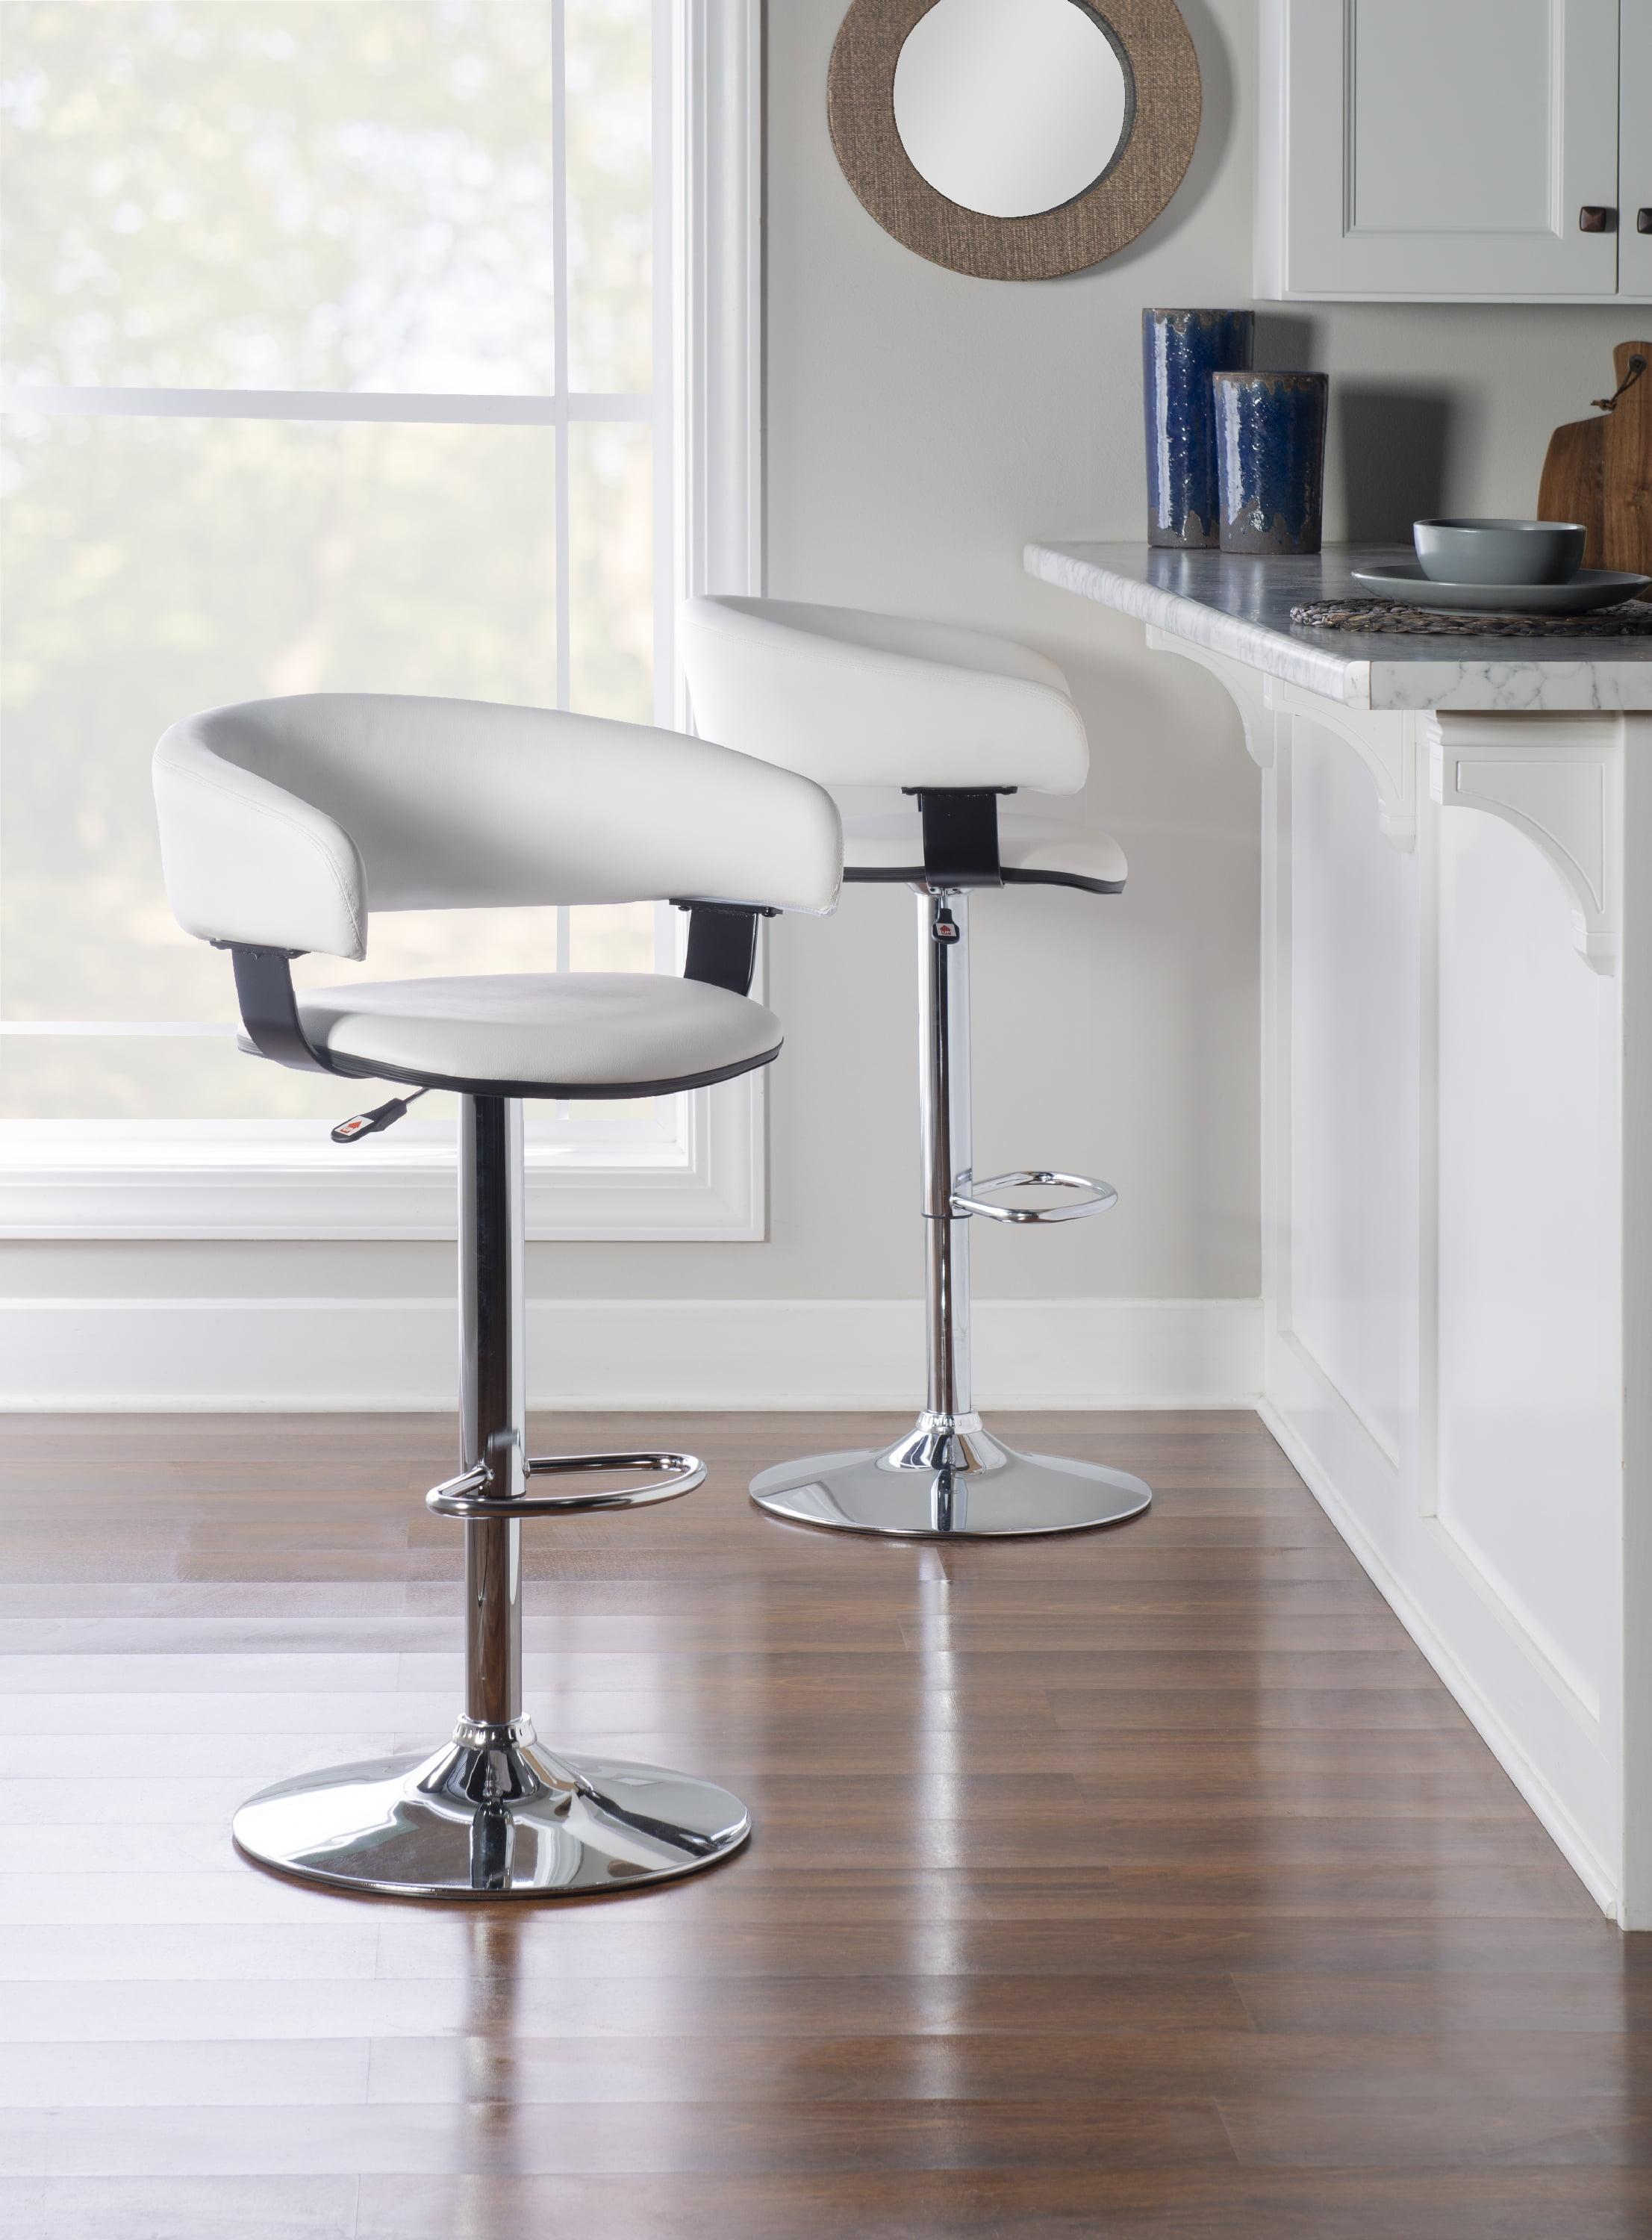 Curved Chrome and White Faux Leather Adjustable Swivel Bar Stool